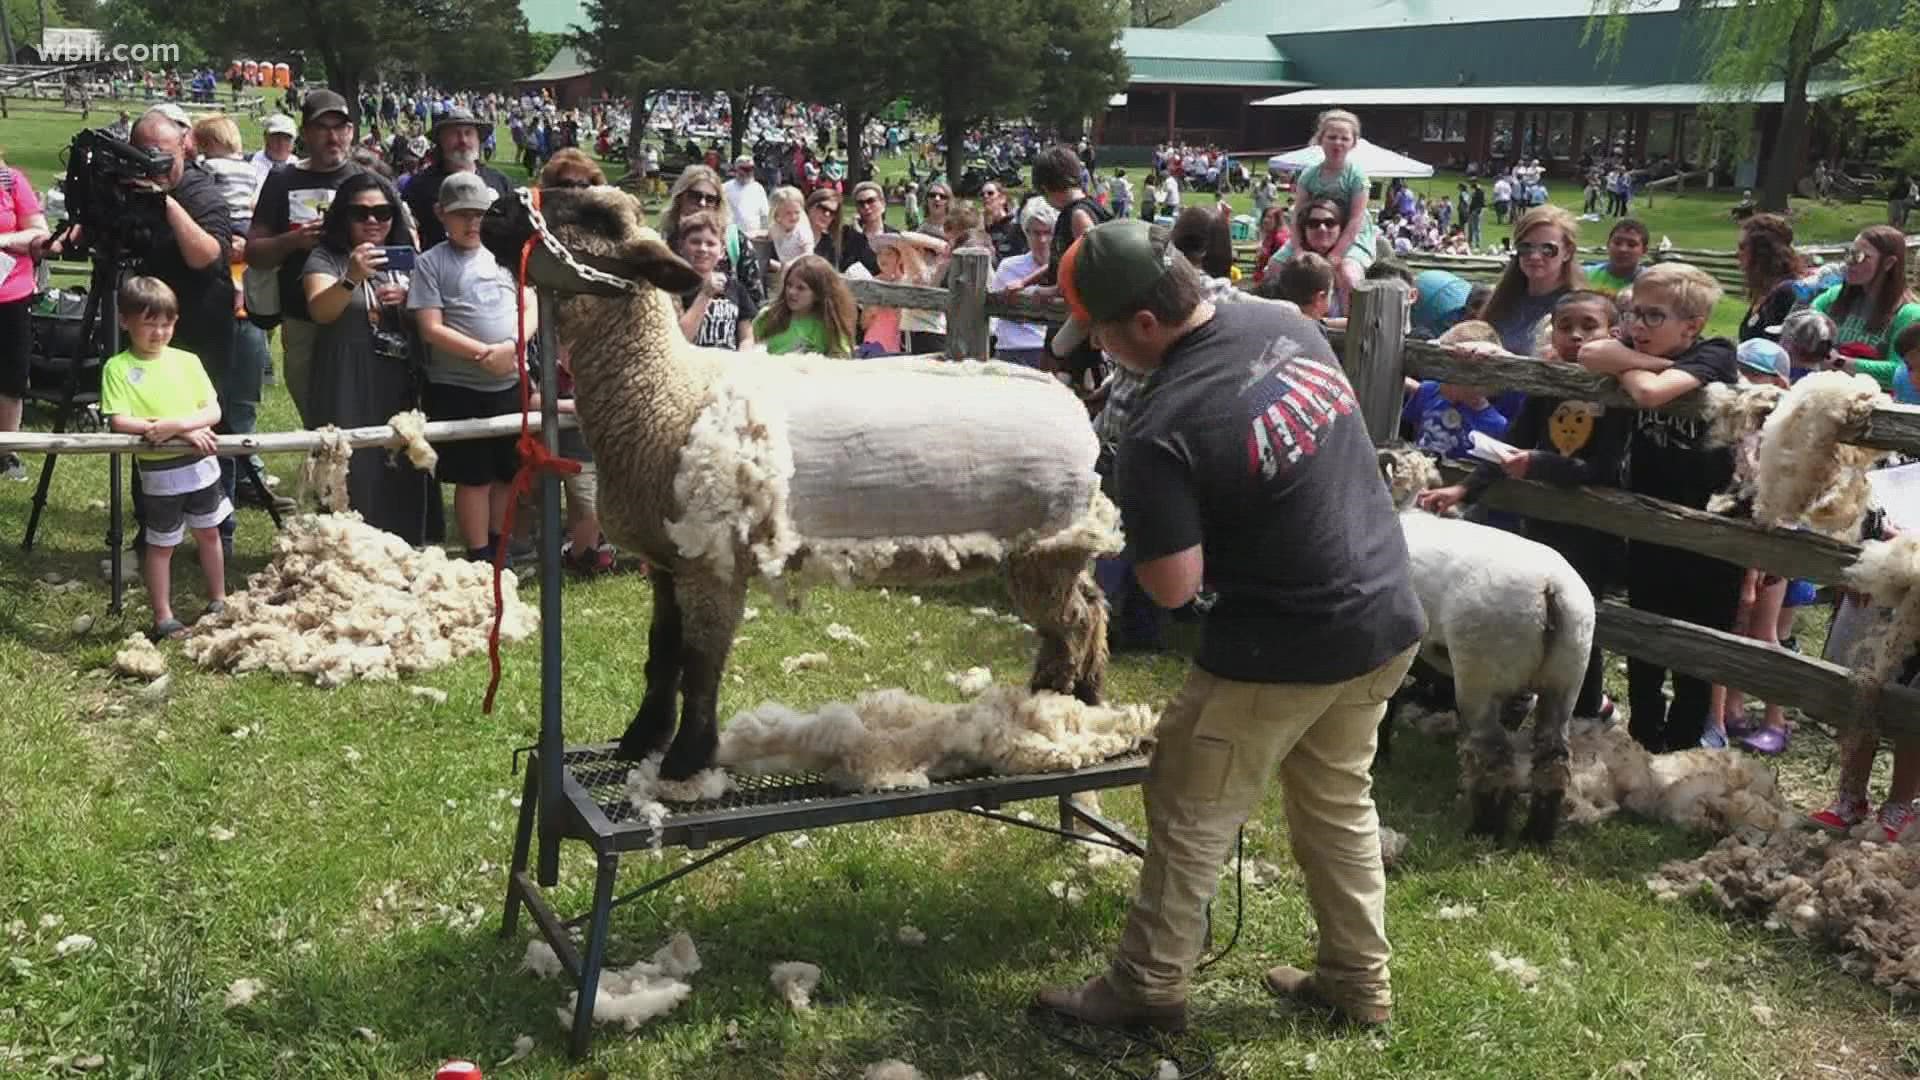 The annual event not only gives the sheep a stylish new look, but also allows kids and families to take a step back in time and learn.